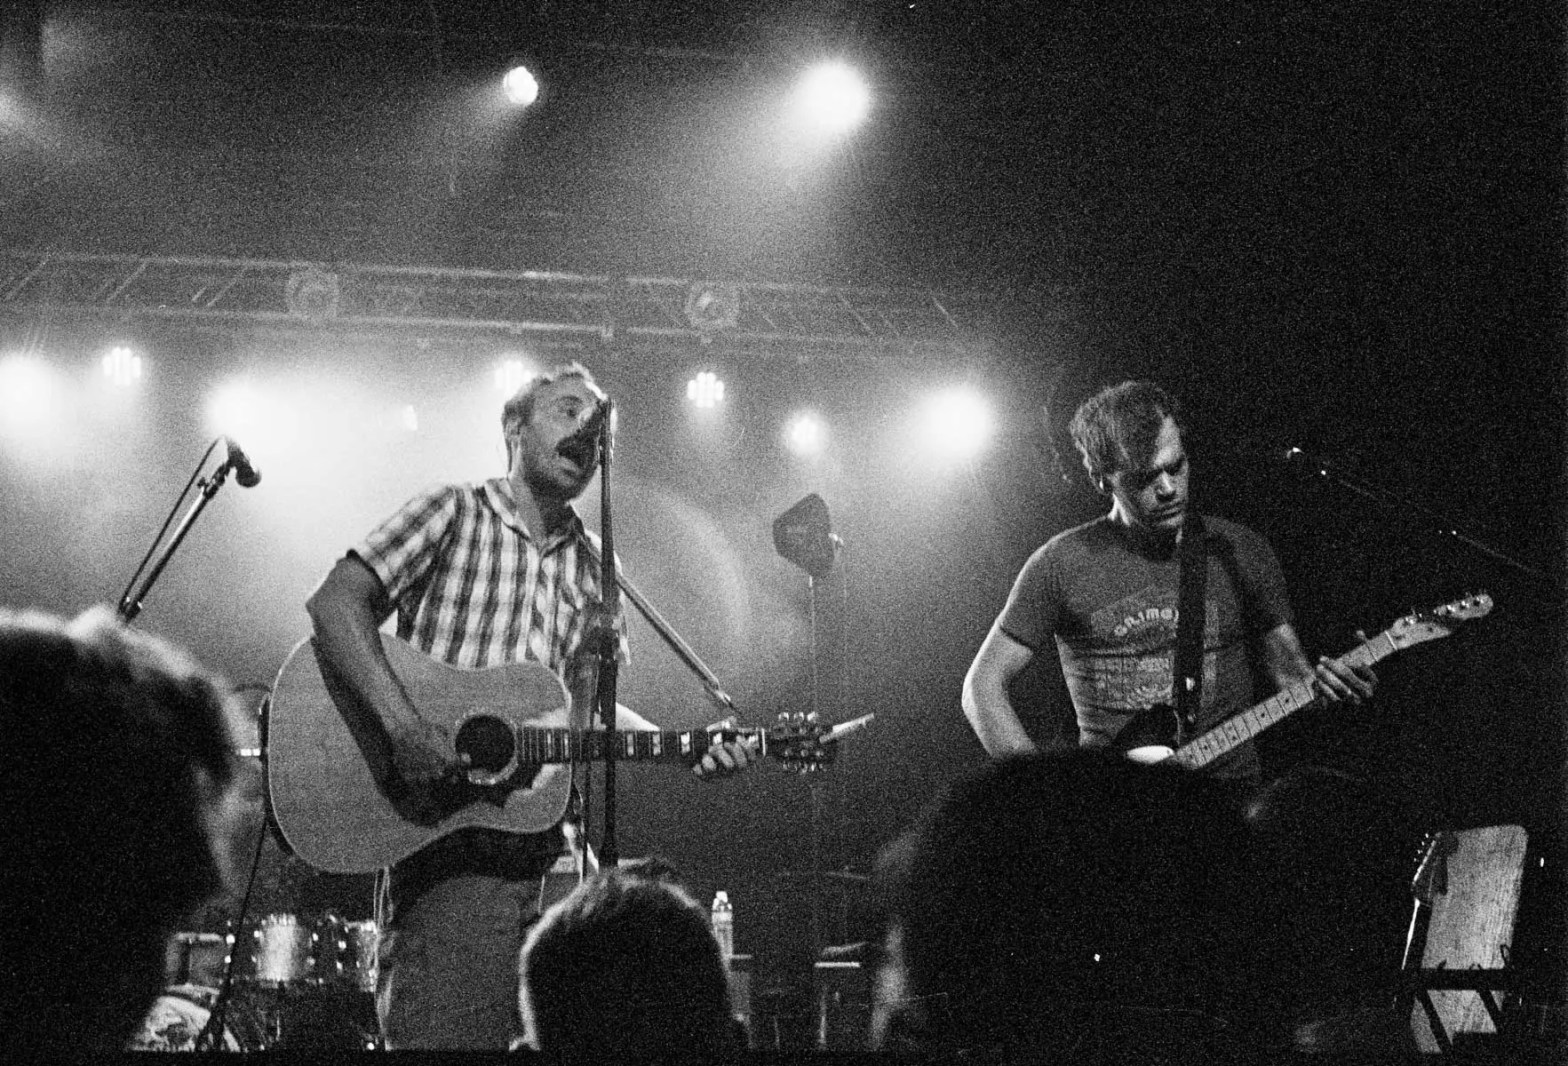 5 Frames… Of mewithoutYou on Kodak T-MAX P3200 (EI 3200 / 35mm format / Canon Canonet G-III QL17)